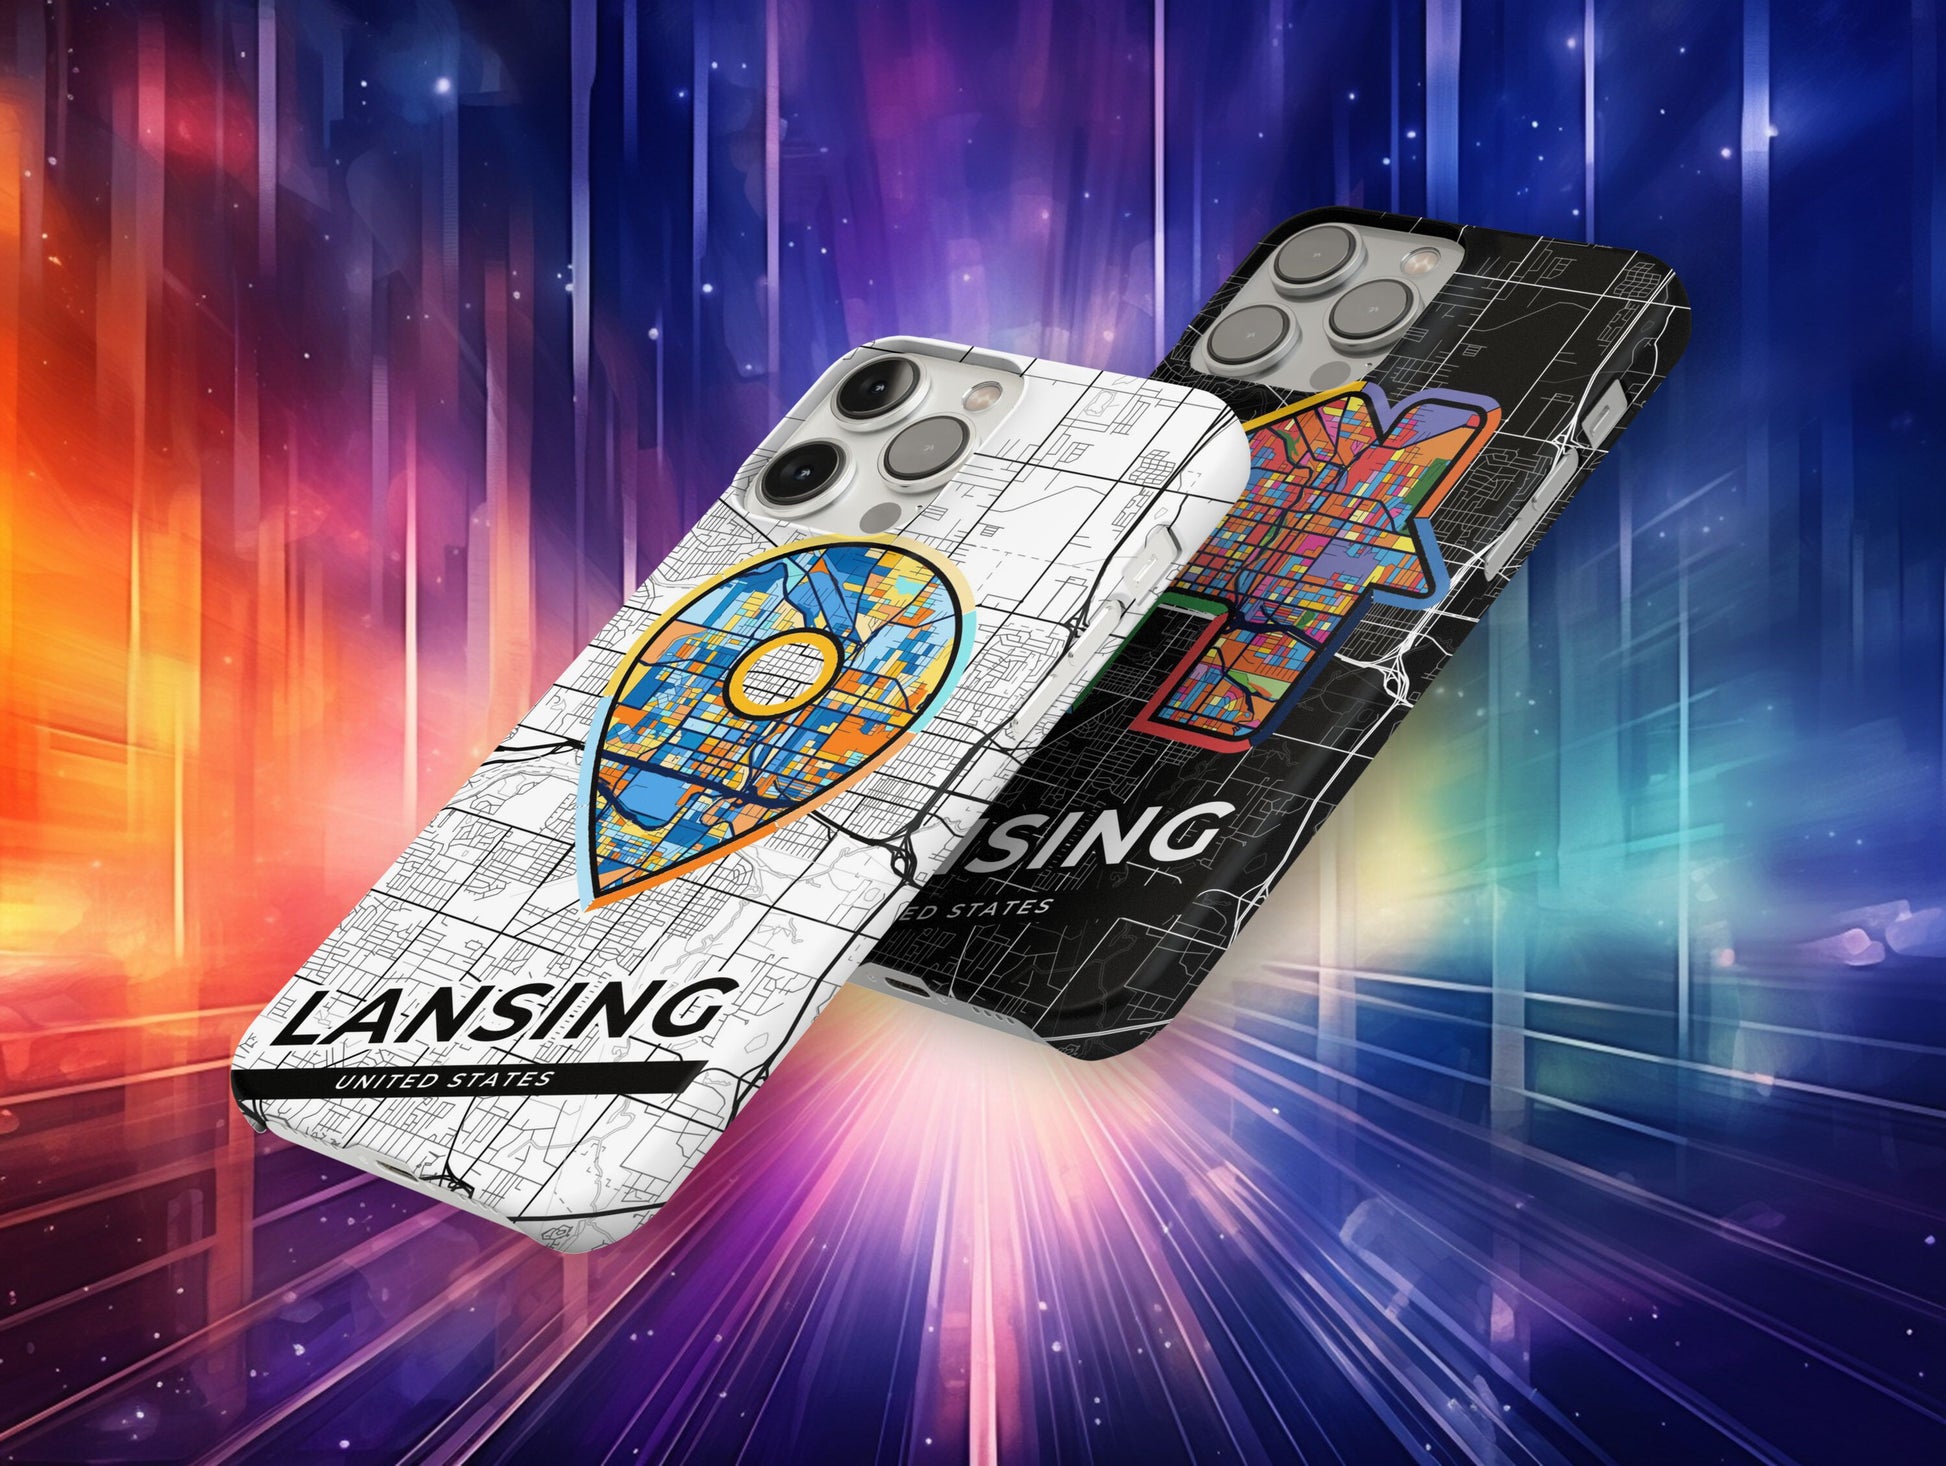 Lansing Michigan slim phone case with colorful icon. Birthday, wedding or housewarming gift. Couple match cases.